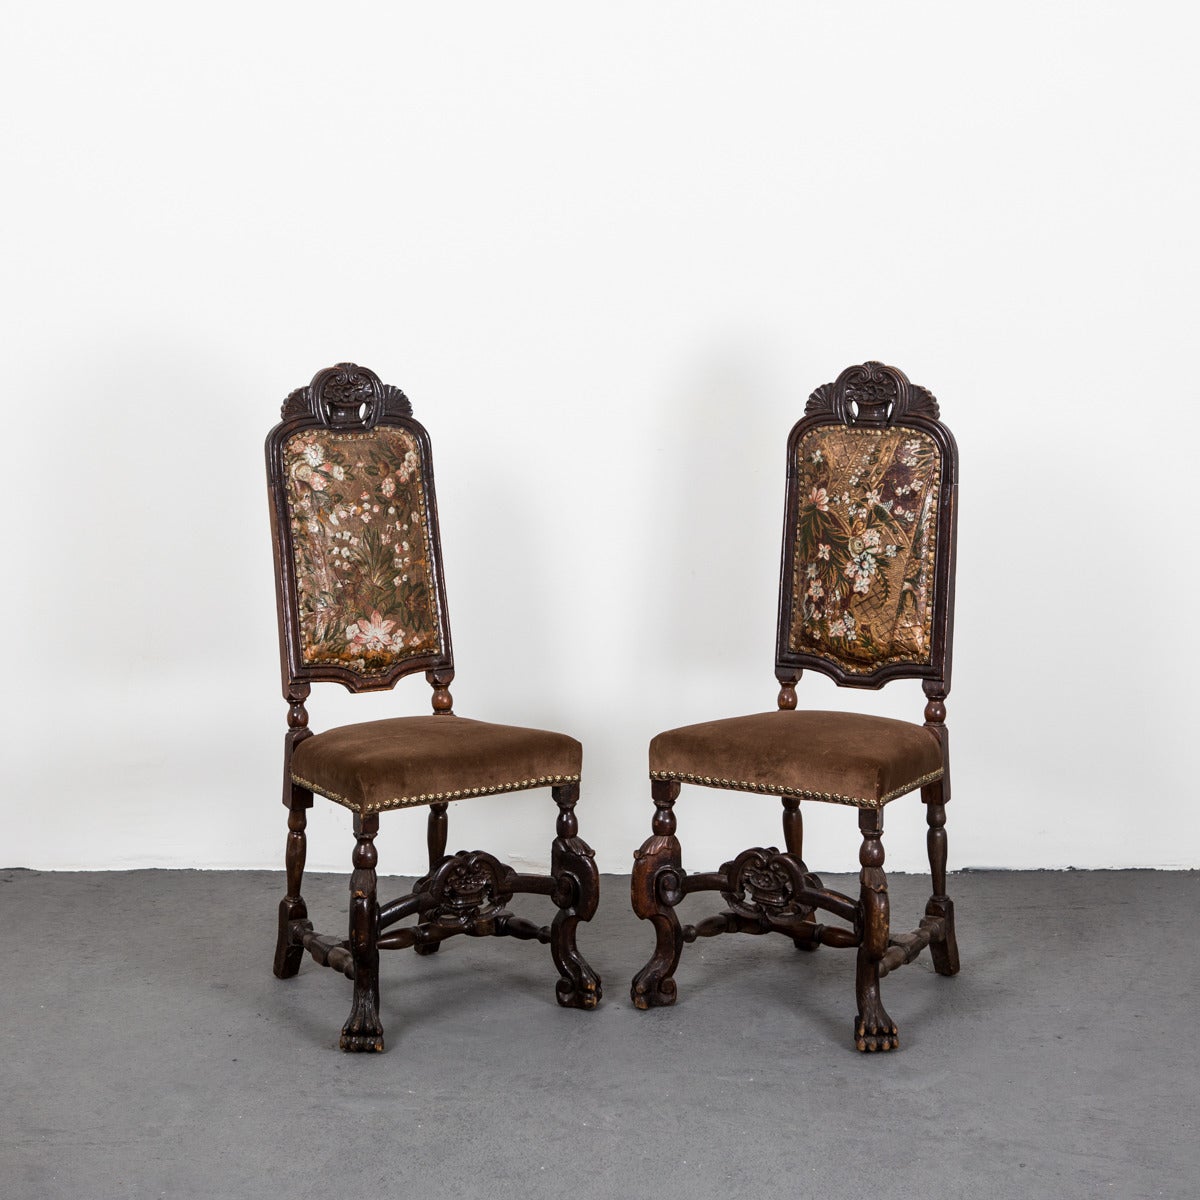 A set of six dining chairs made in Sweden in the Baroque style, circa 18th century.